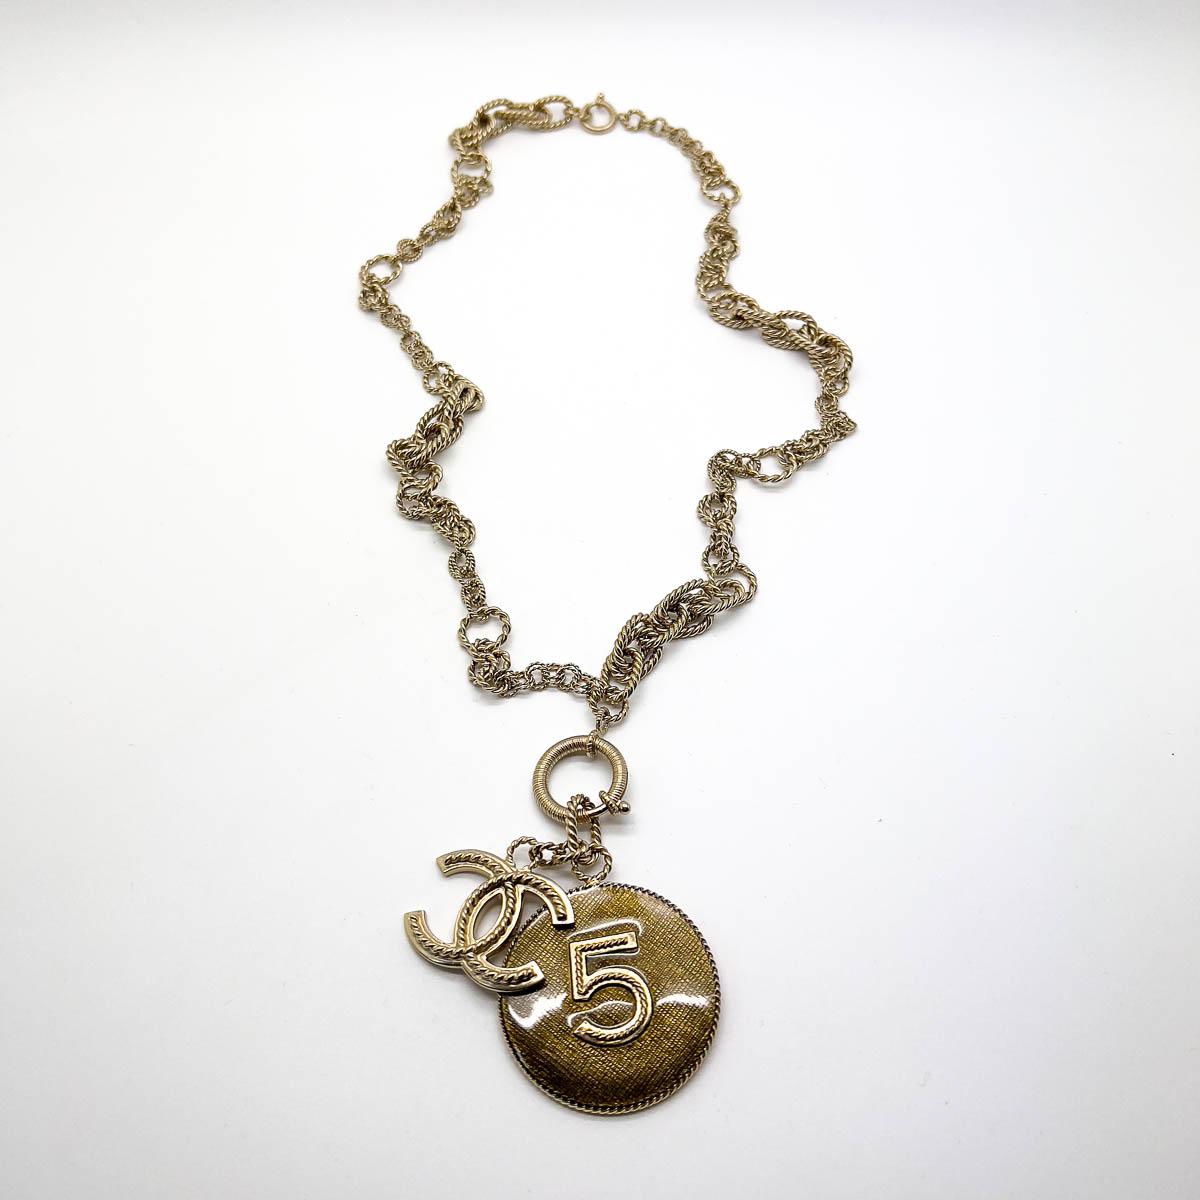 Vintage Chanel Statement No. 5 Rope Chain Charm Necklace 2013 For Sale 4